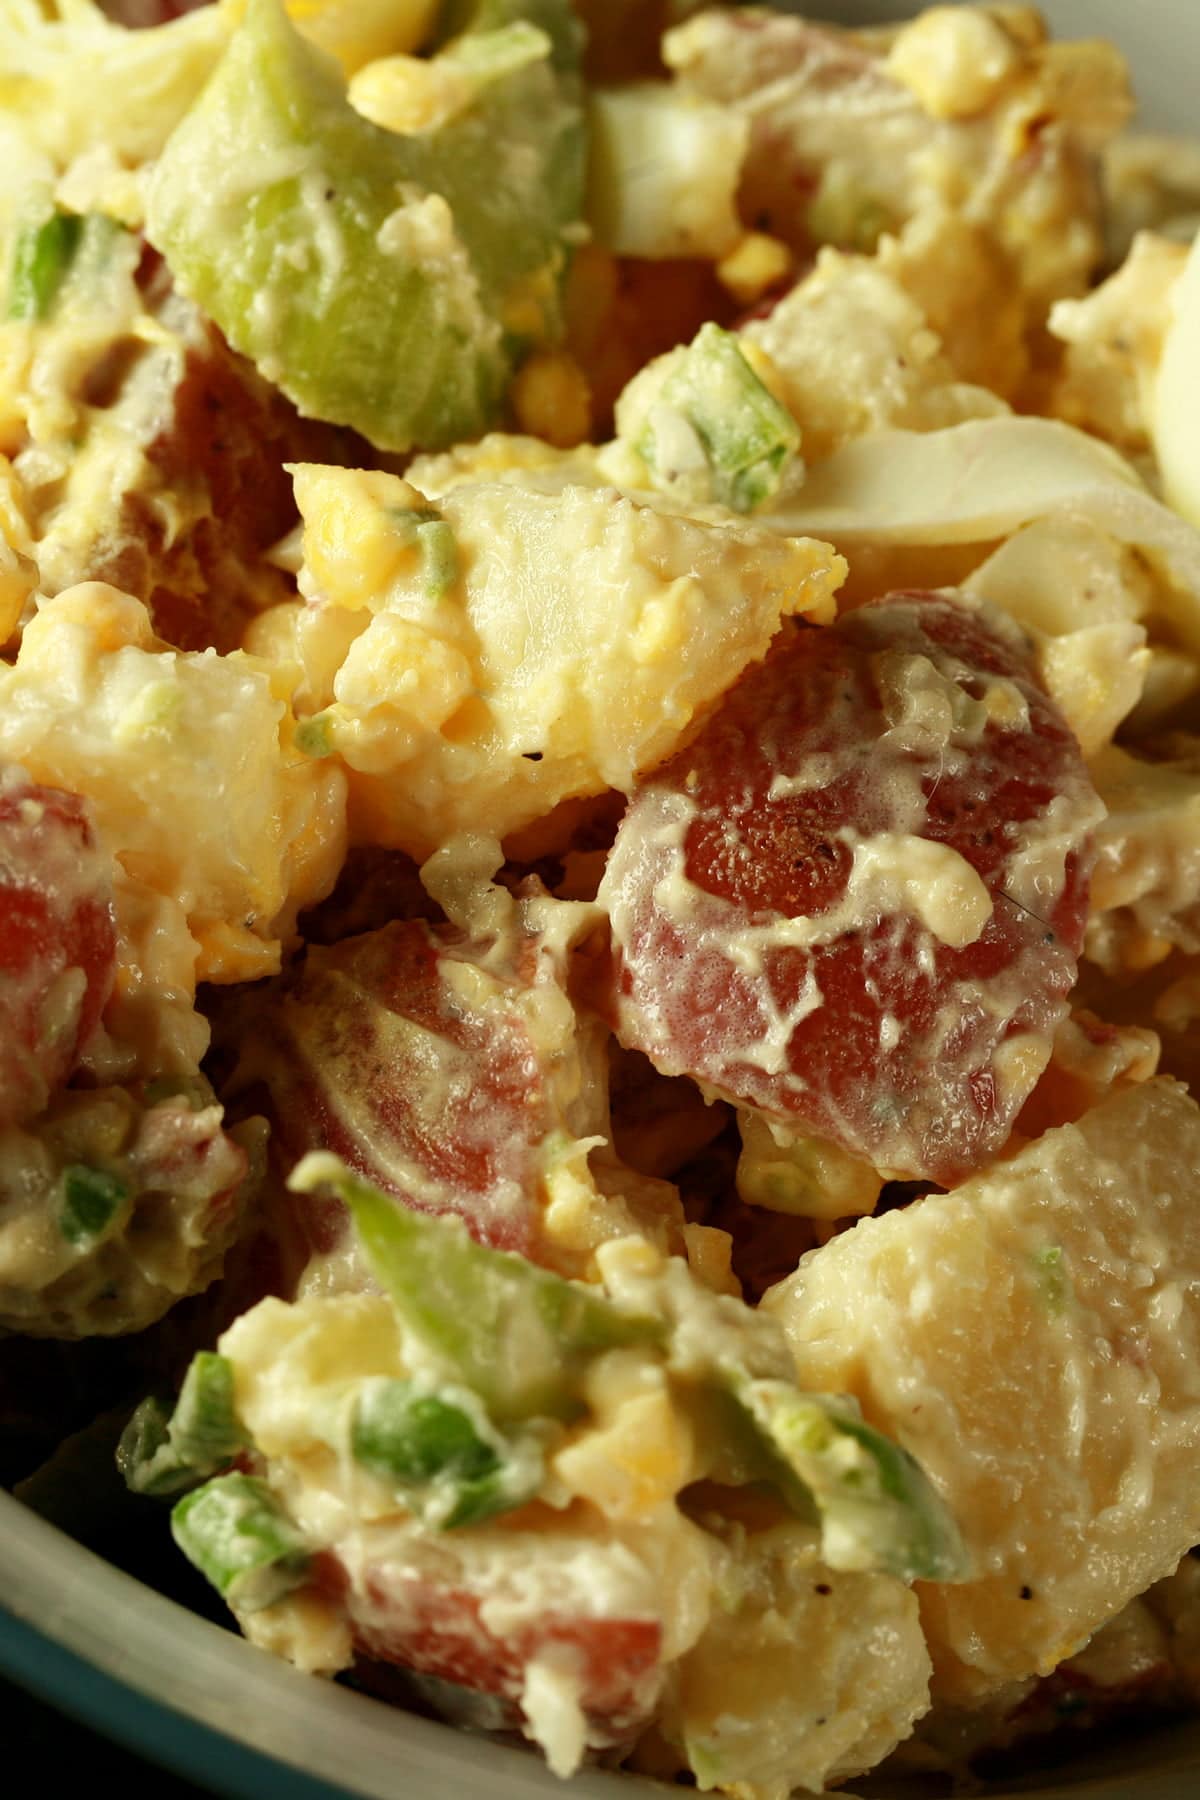 A bowl of a creamy cold-smoked potato salad. Chunks of red potatoes, celery slices, and hard boiled egg are all visible.